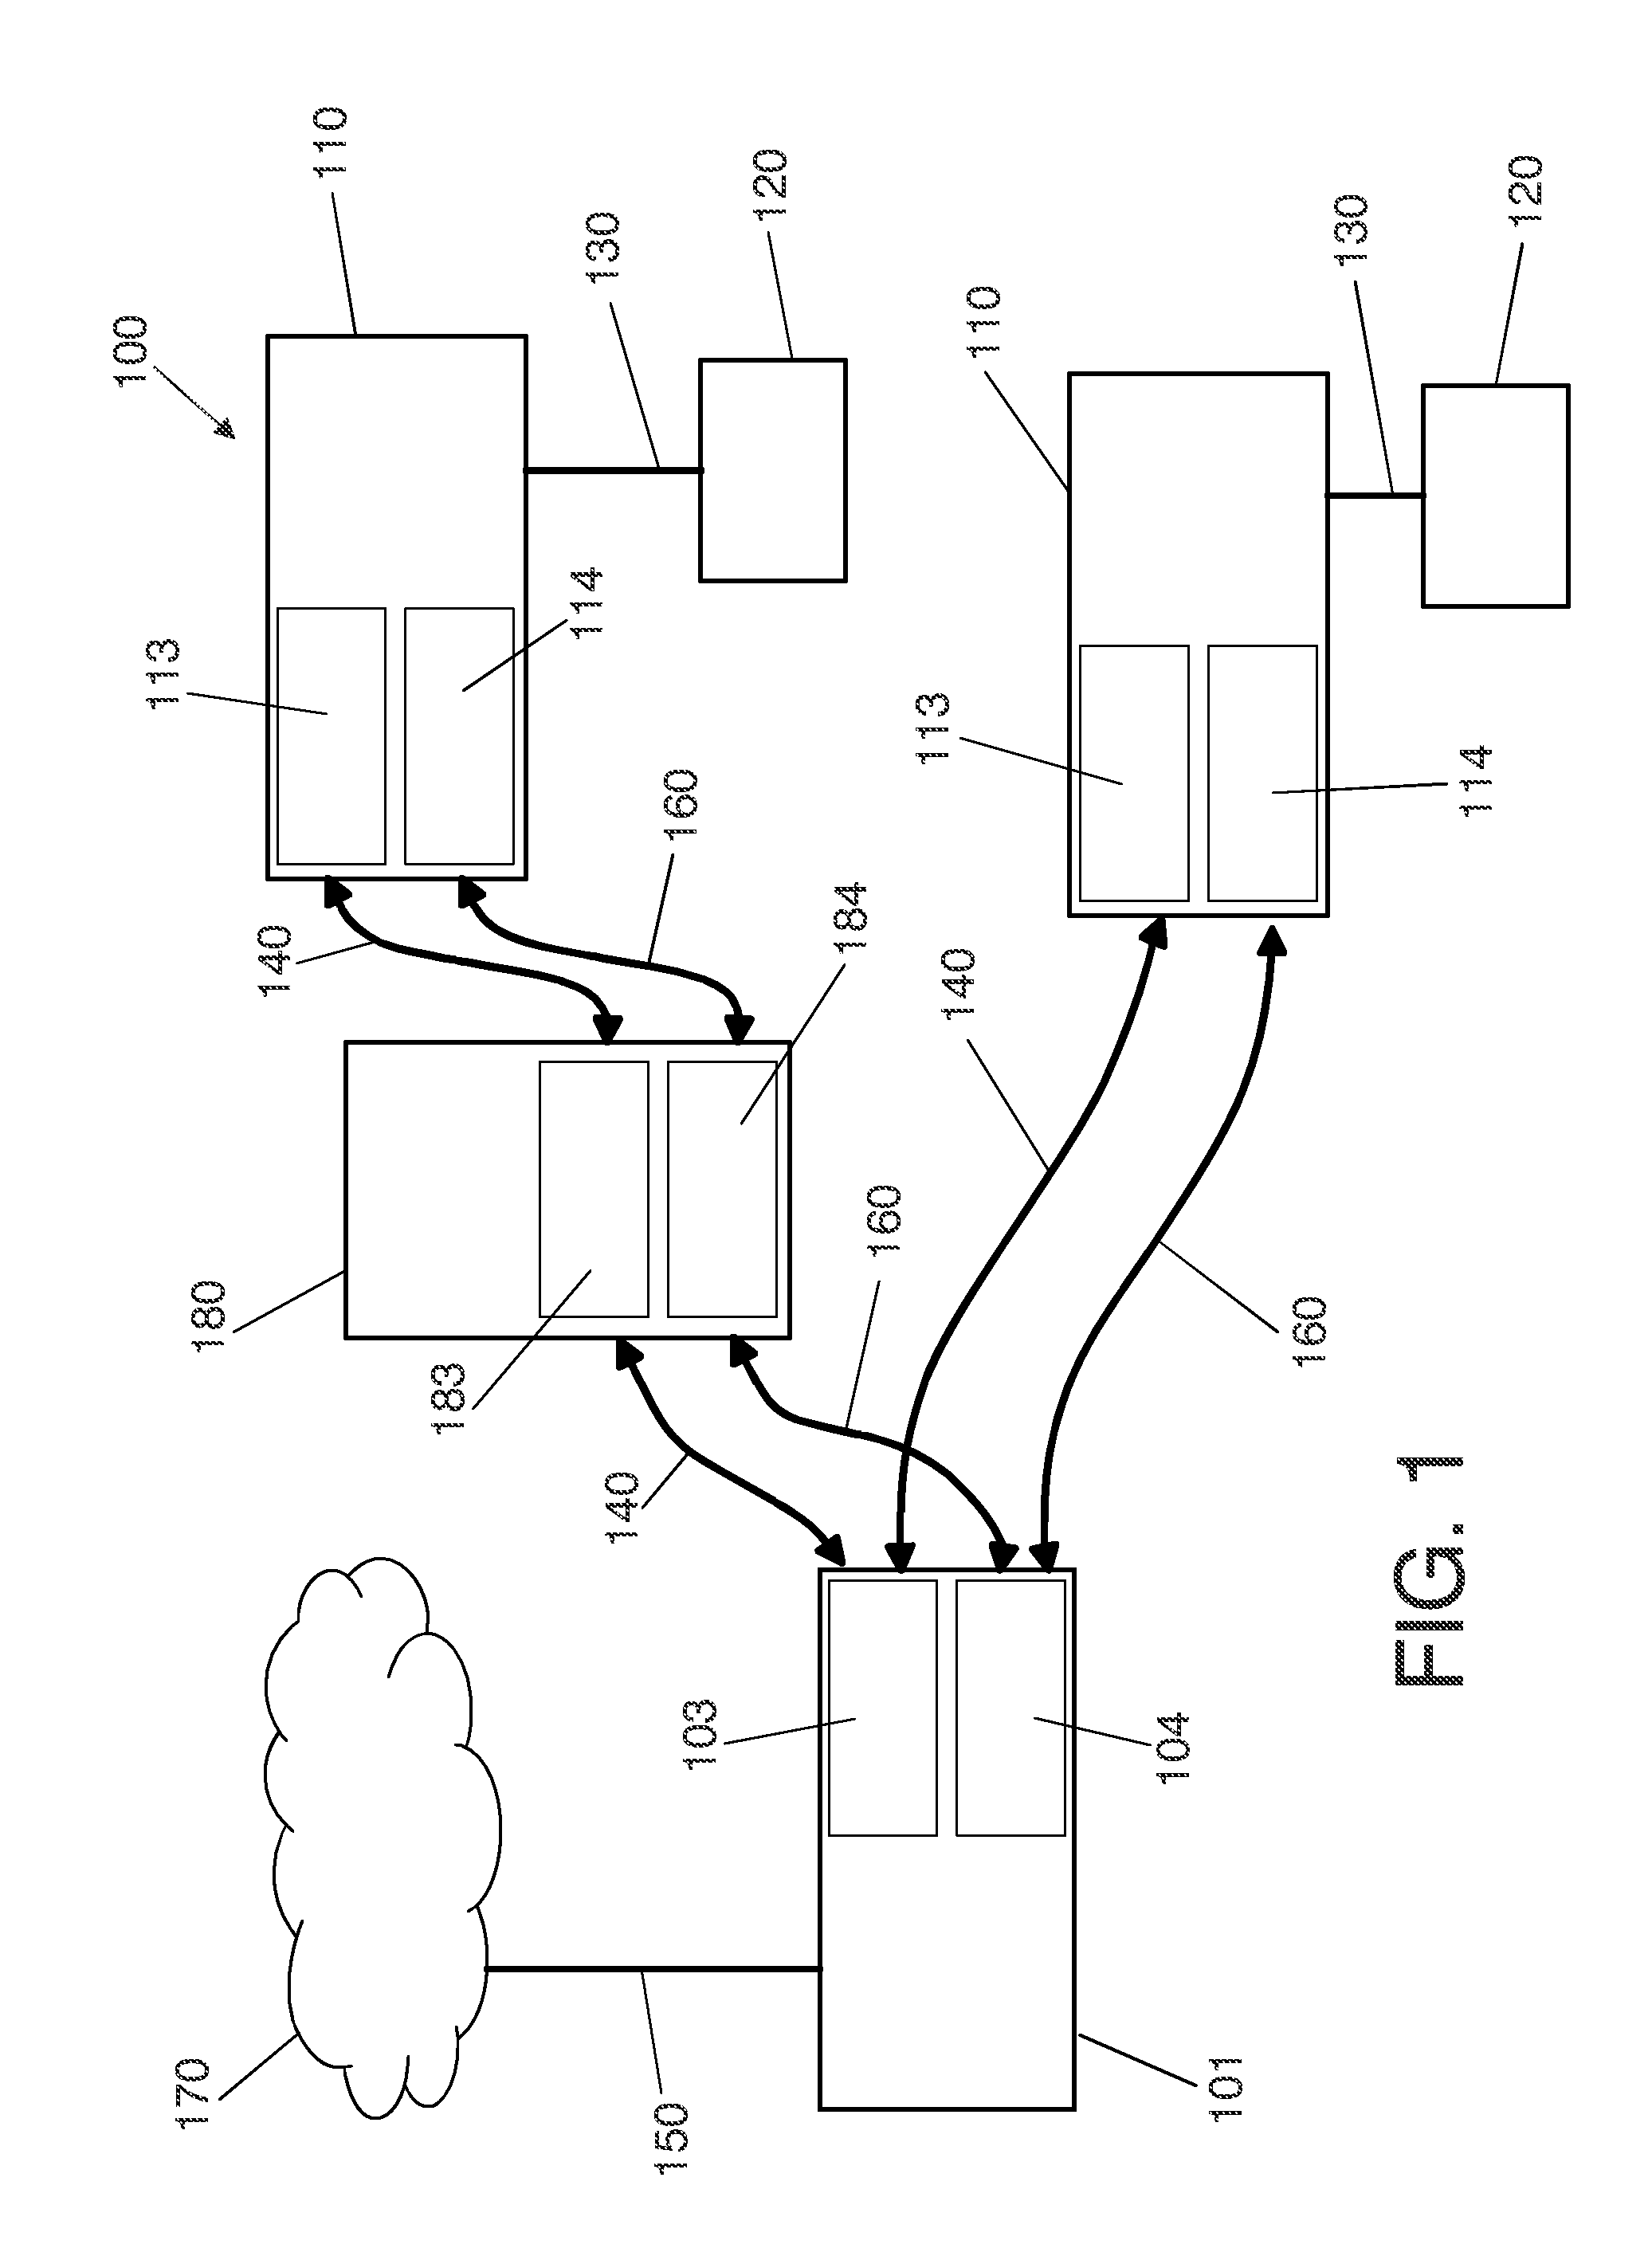 Method for distributing wireless audio and video signals indoors